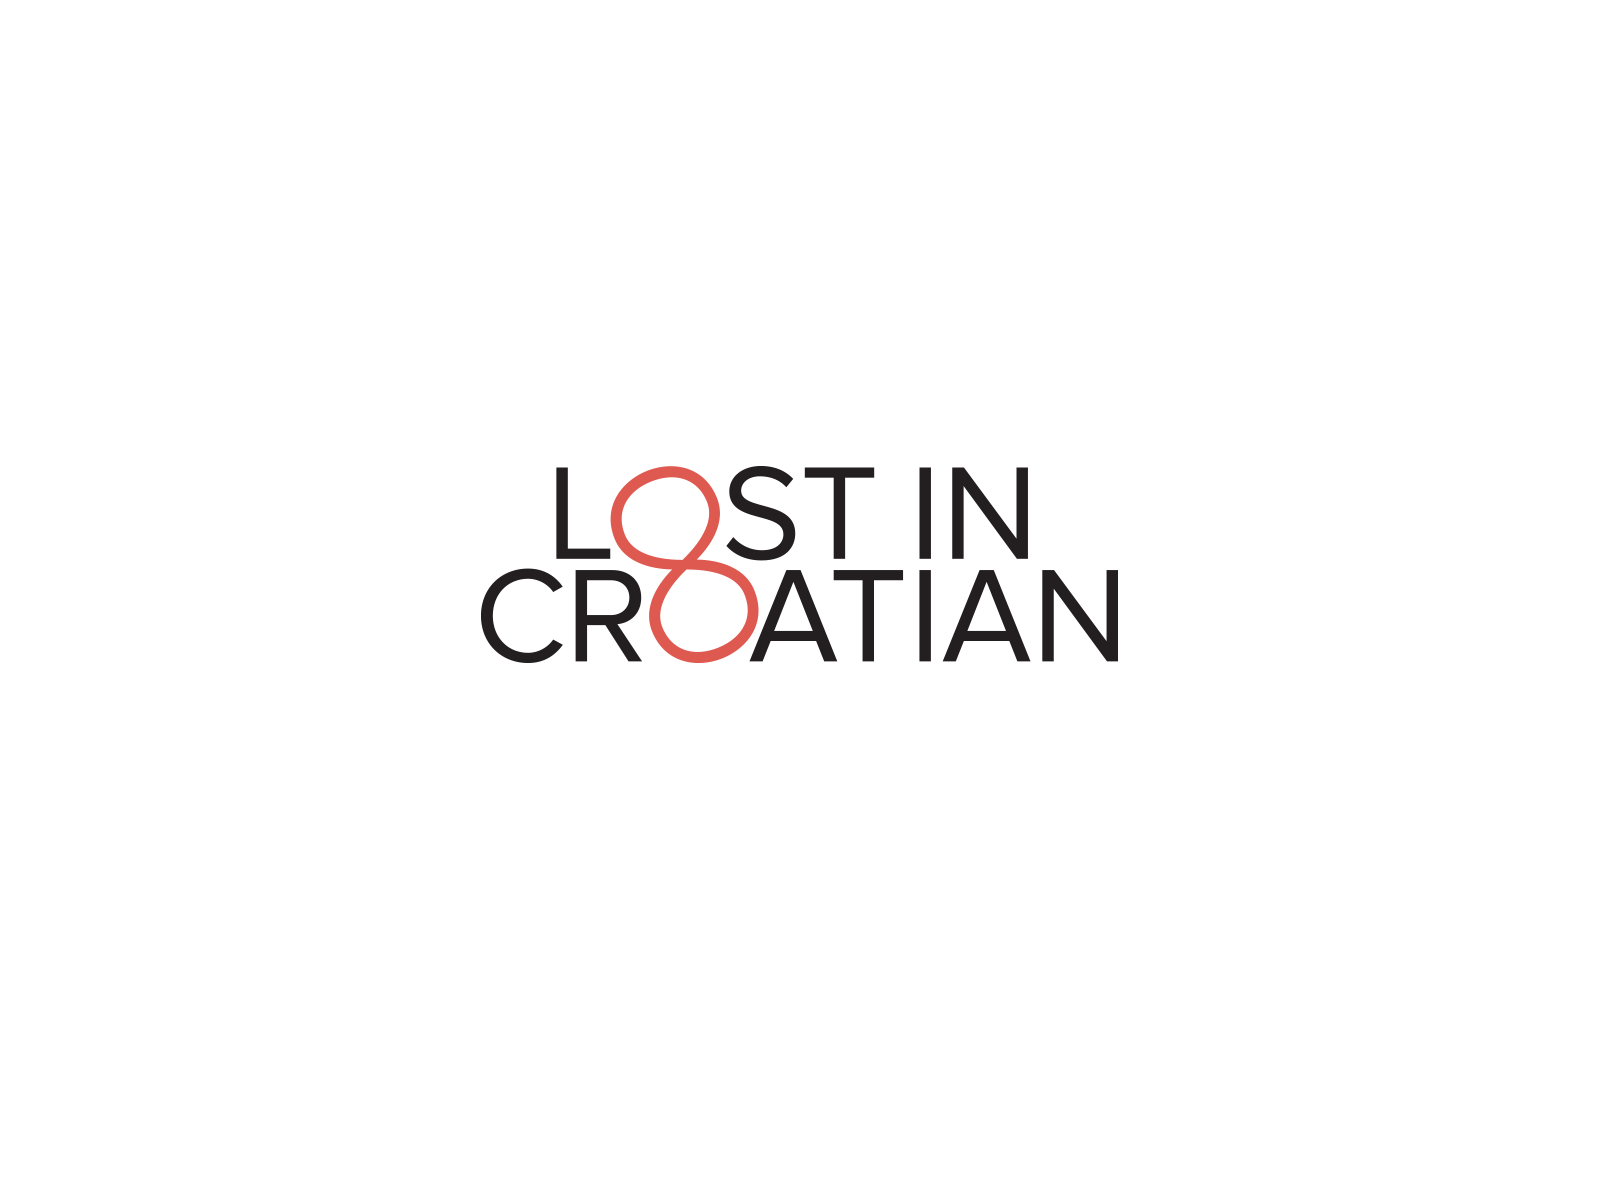 Lost in Croatian | KnowHow creative process download education eps freebie goldenratio logo design making of ratios